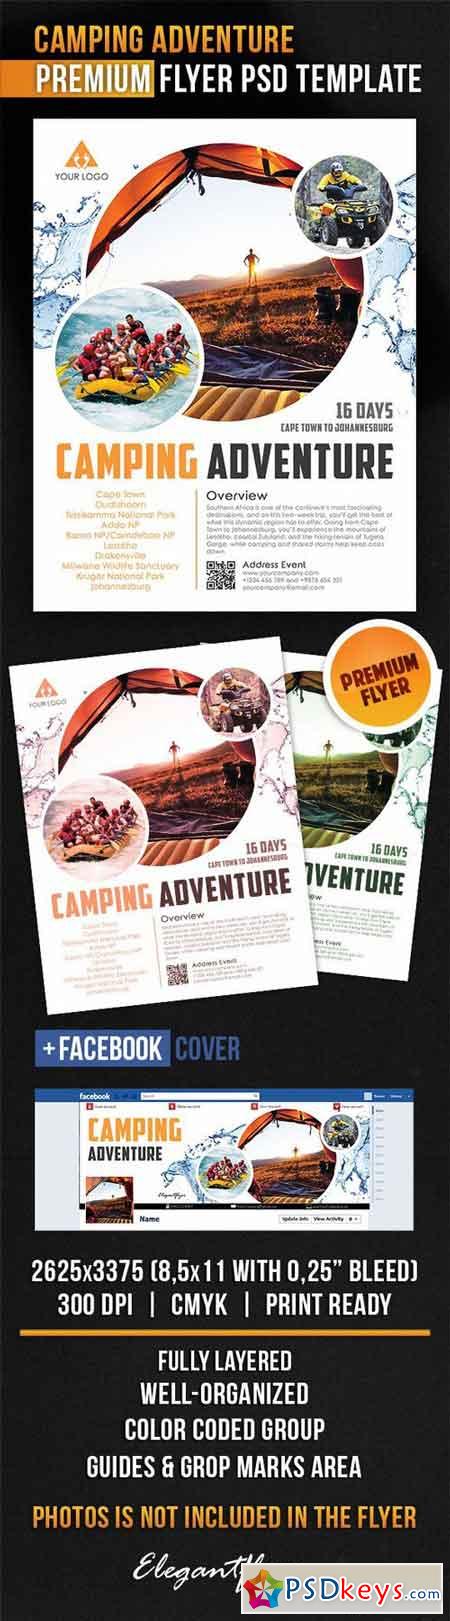 Camping Adventure  Flyer PSD Template + Facebook Cover